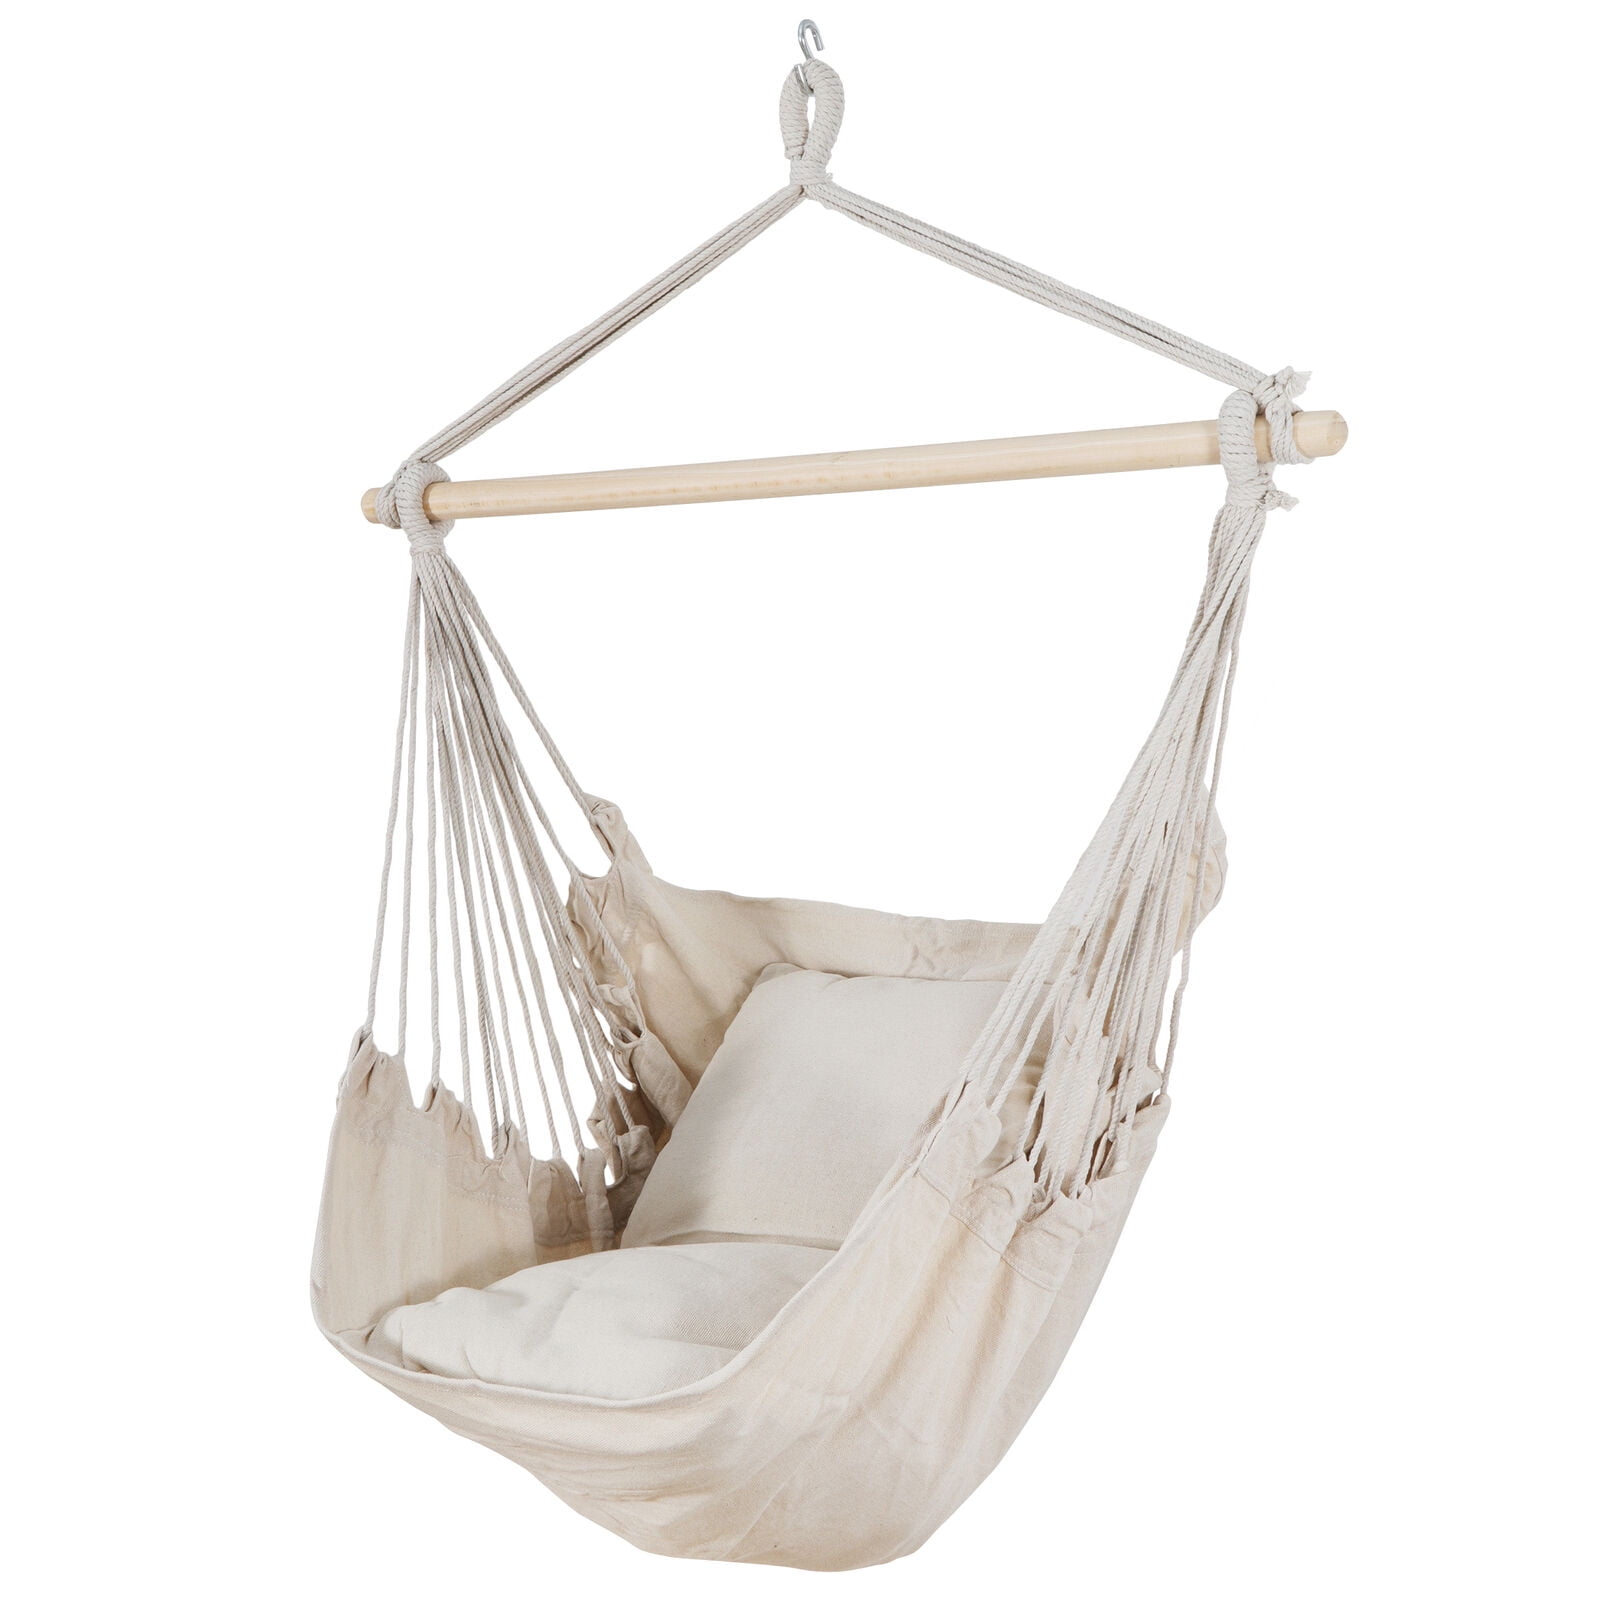 Hammock Cotton Swing Camping Hanging Rope Chair Wooden Beige Outdoor Patio 